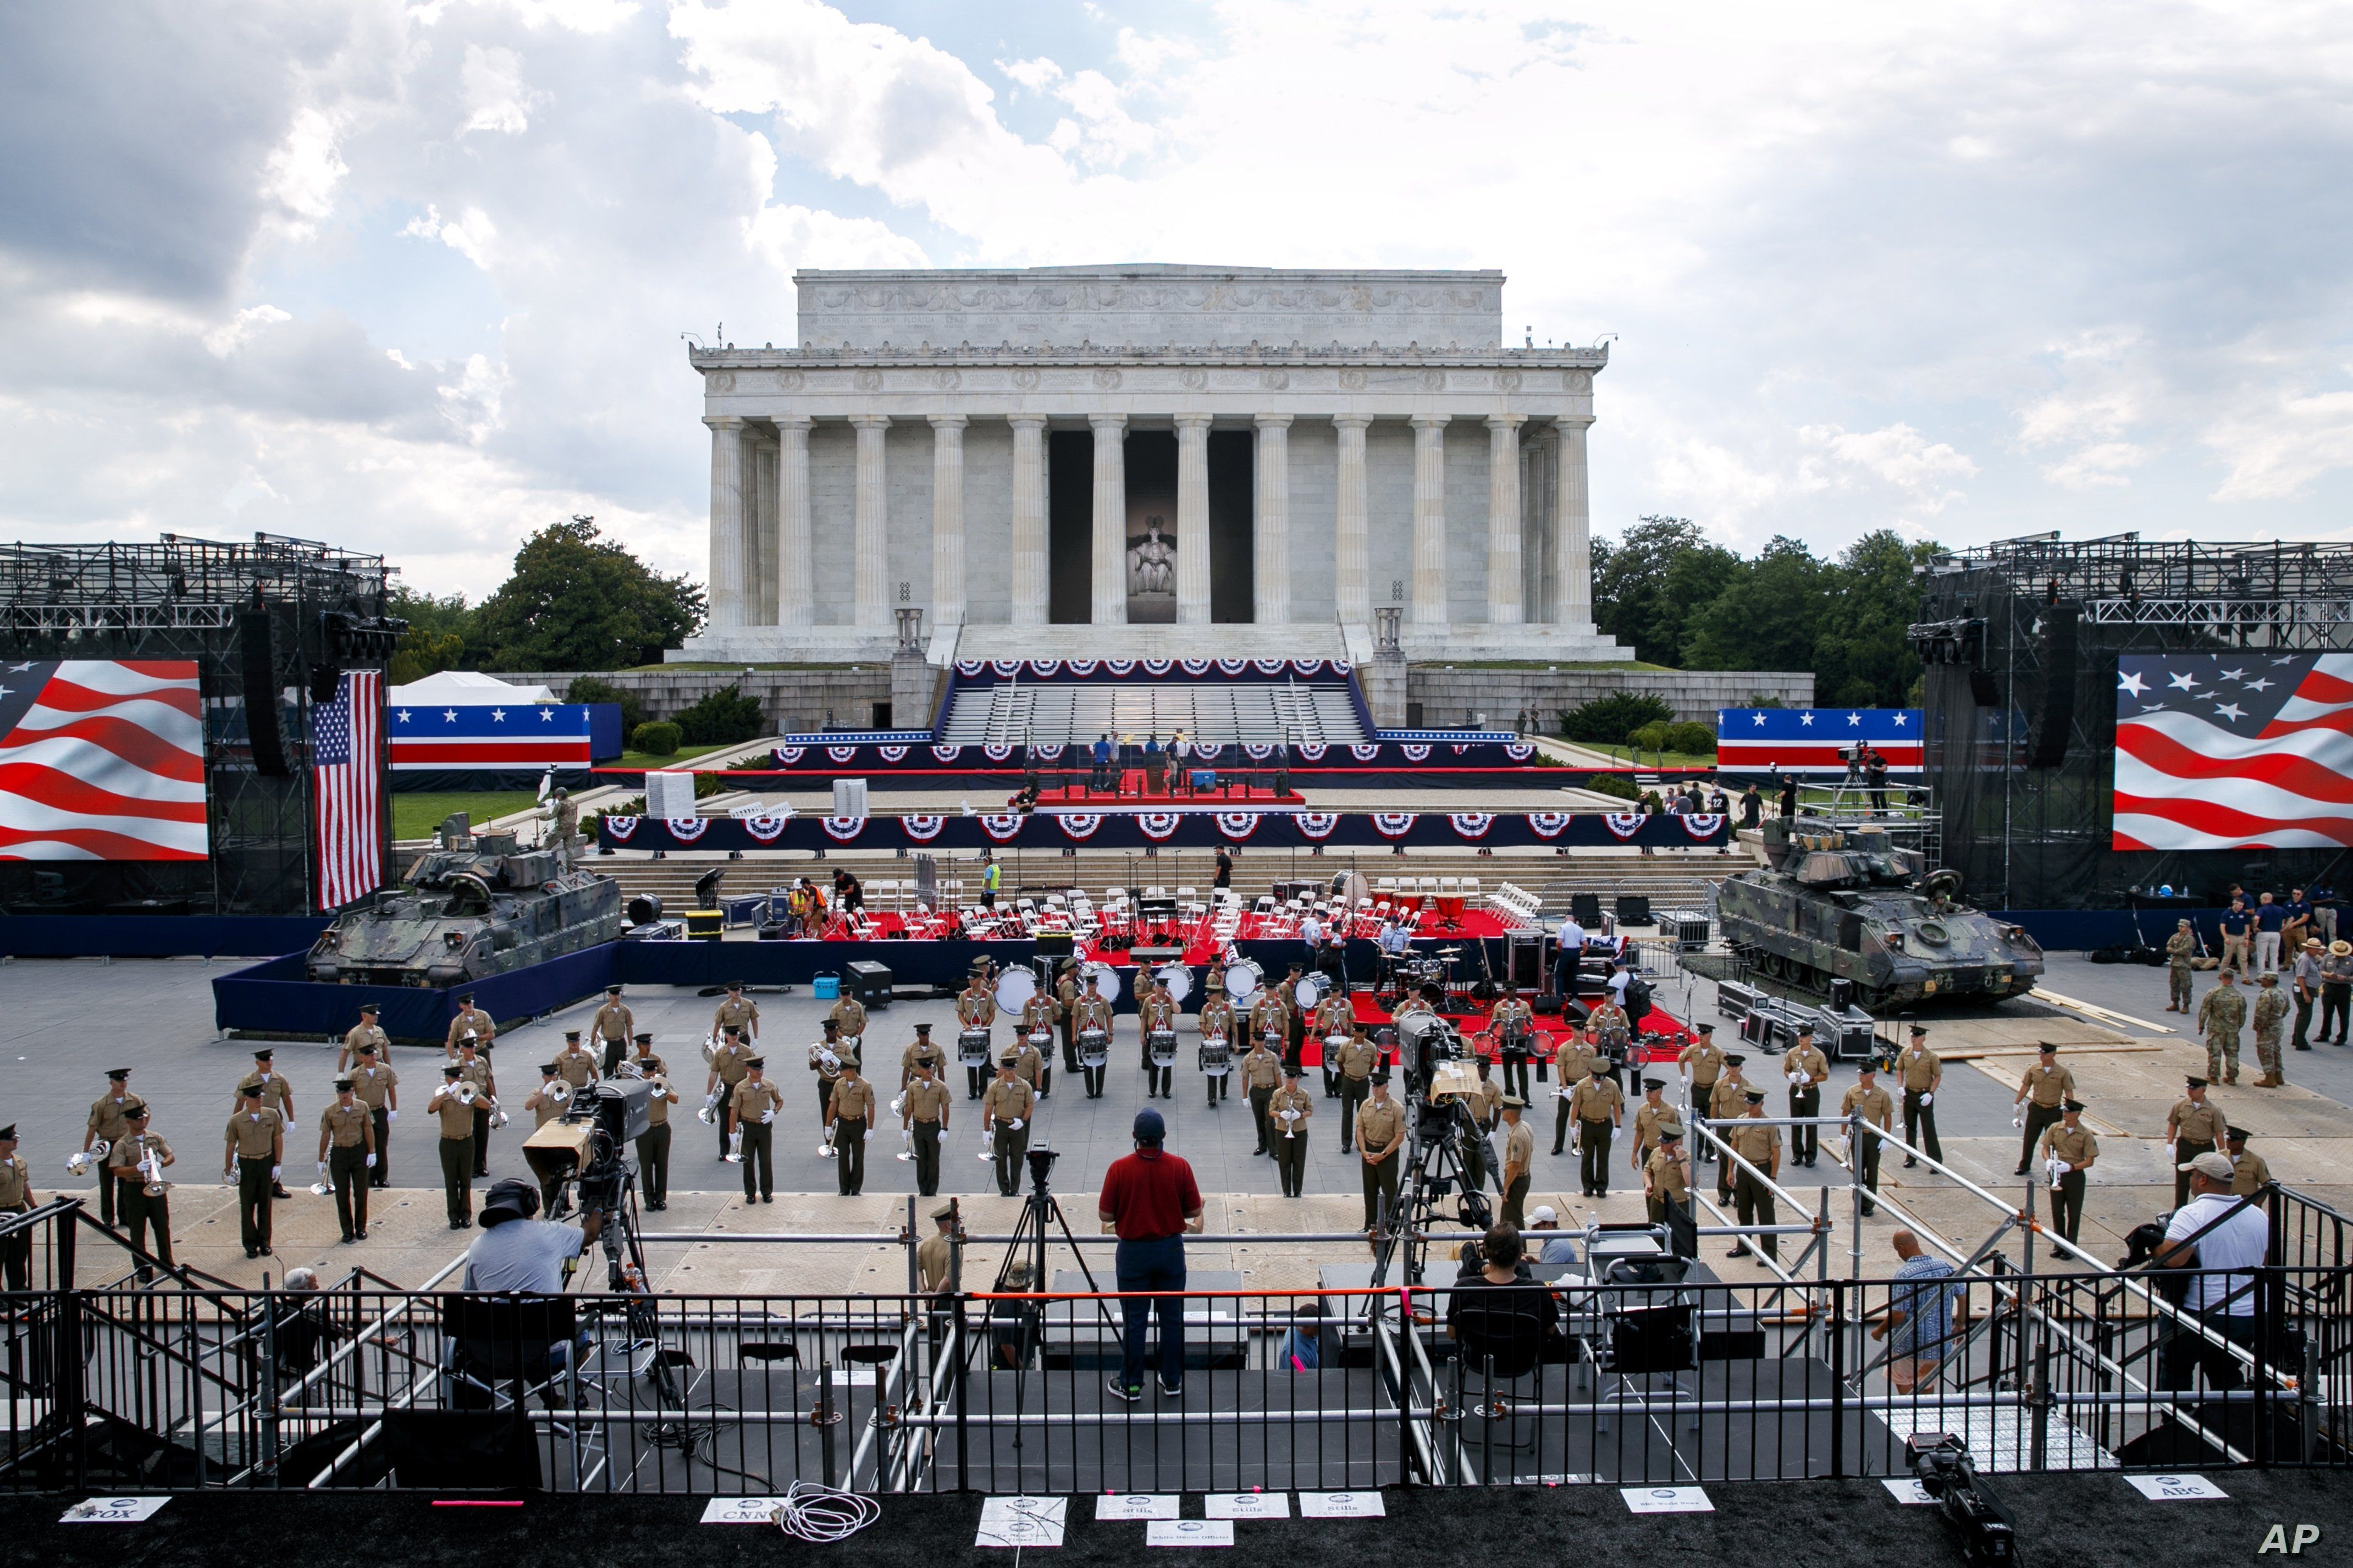 Two Bradley Fighting Vehicles flank the stage being prepared in front of the Lincoln Memorial, Wednesday, July 3, 2019, in Washington, ahead of planned Fourth of July festivities with President Donald Trump. 